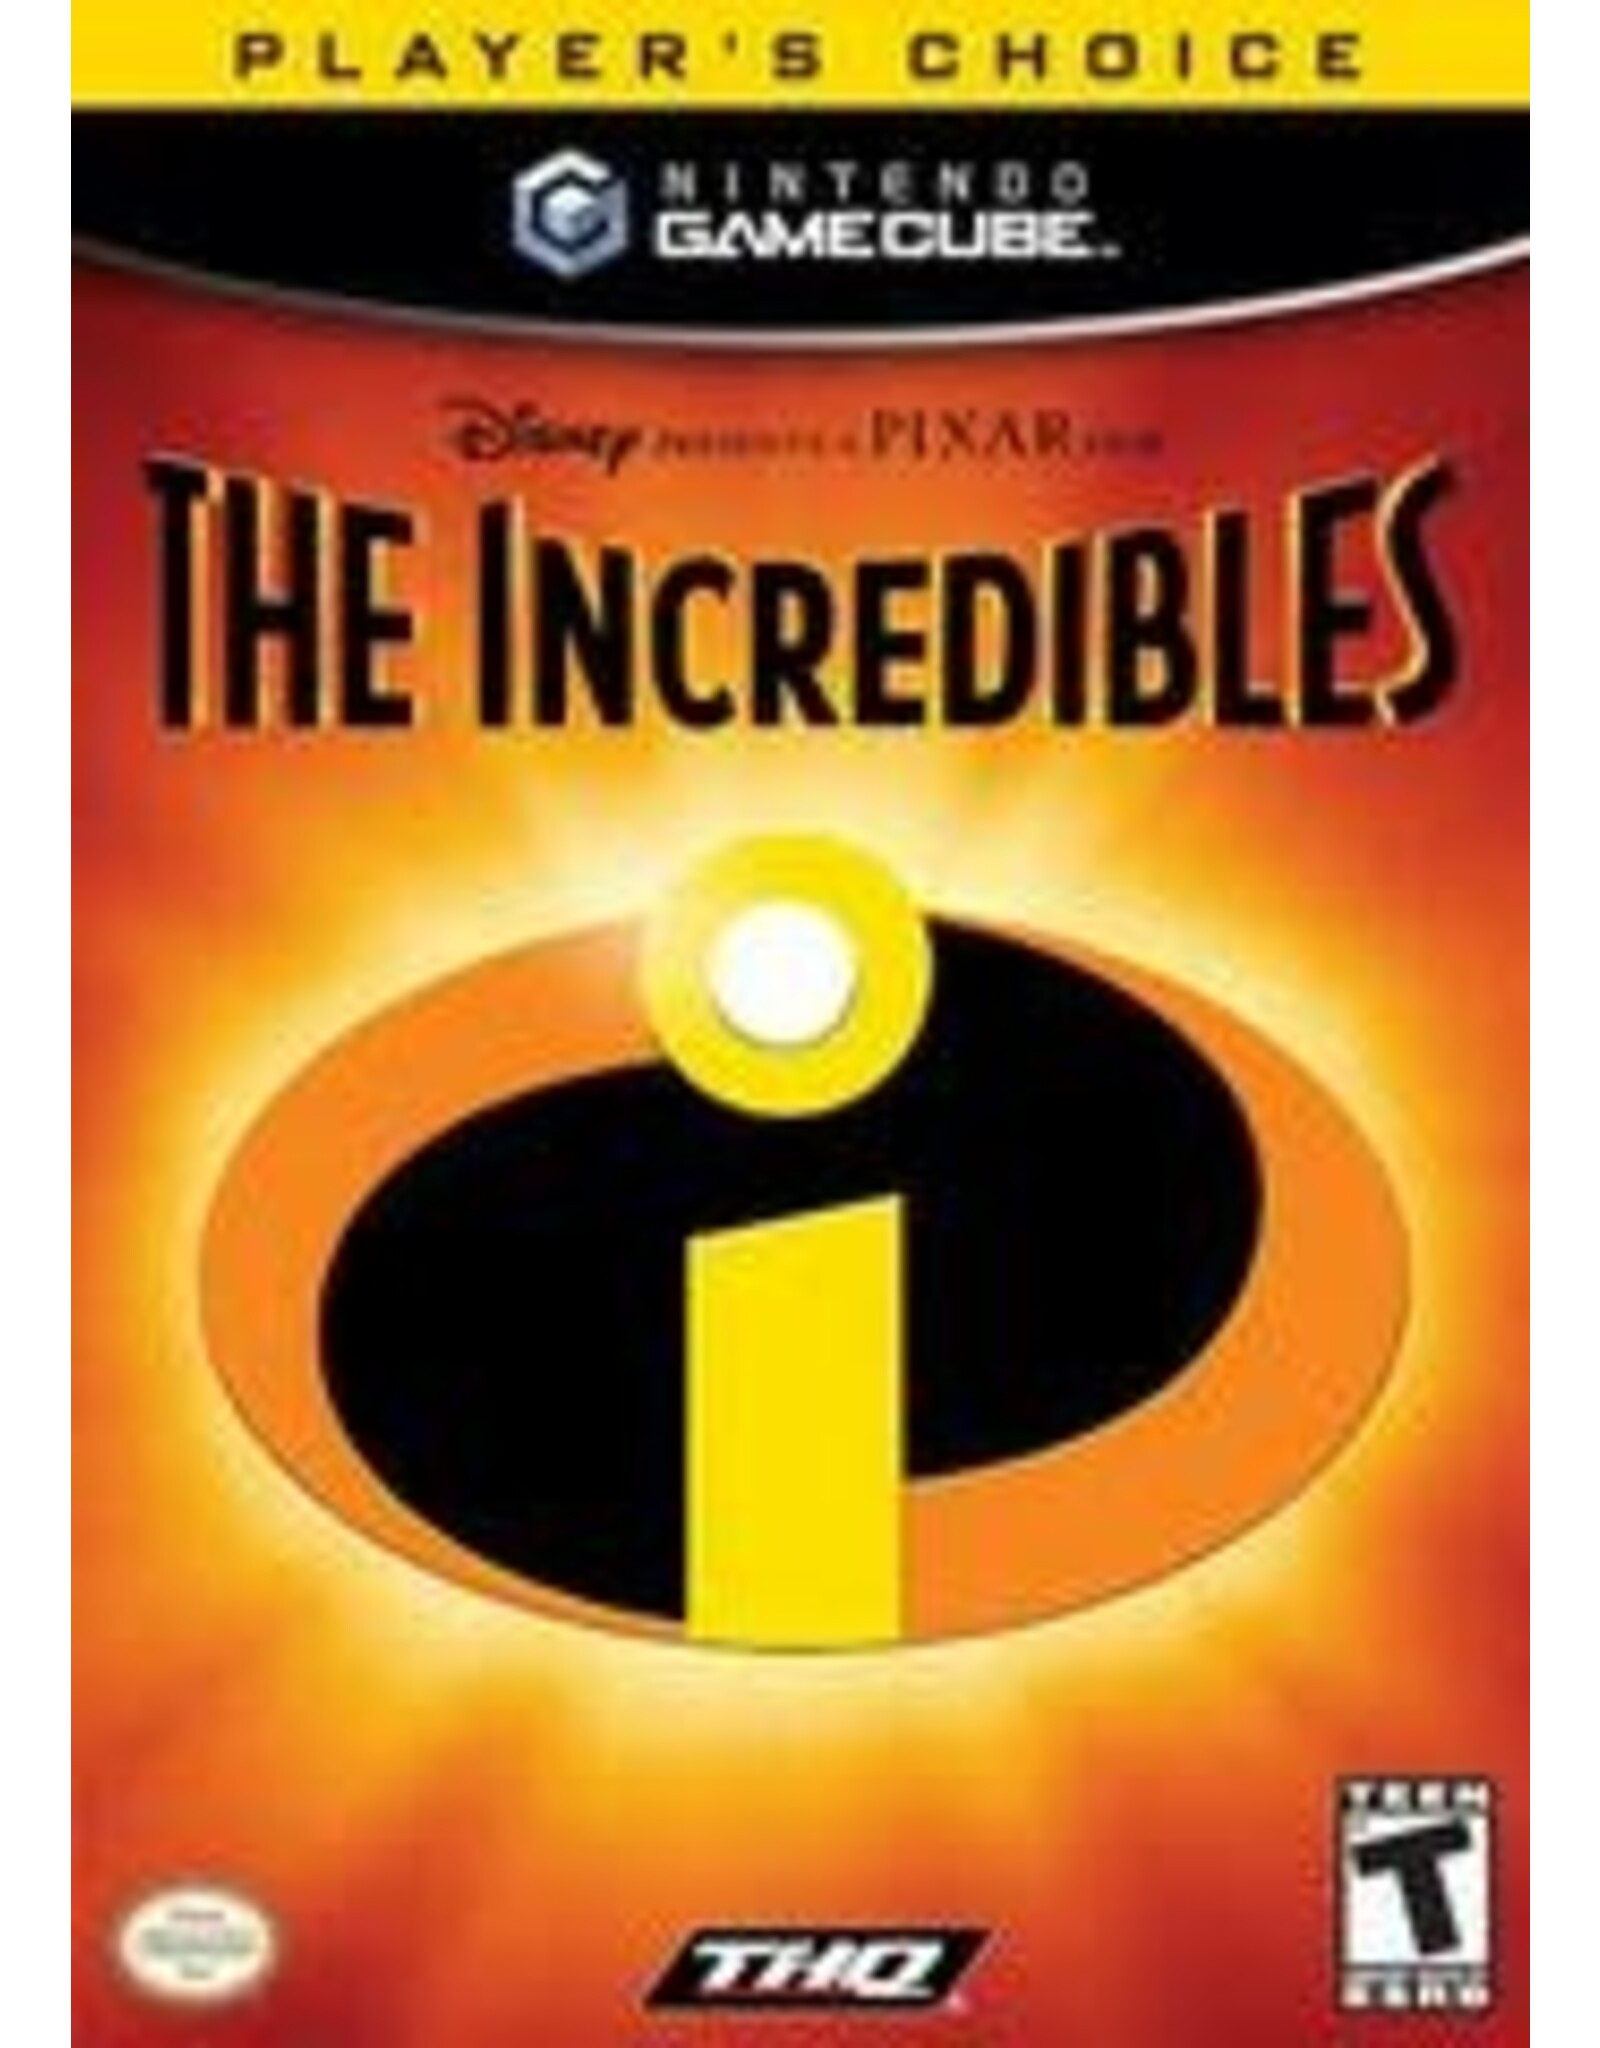 Gamecube Incredibles, The (Player's Choice, No Manual)